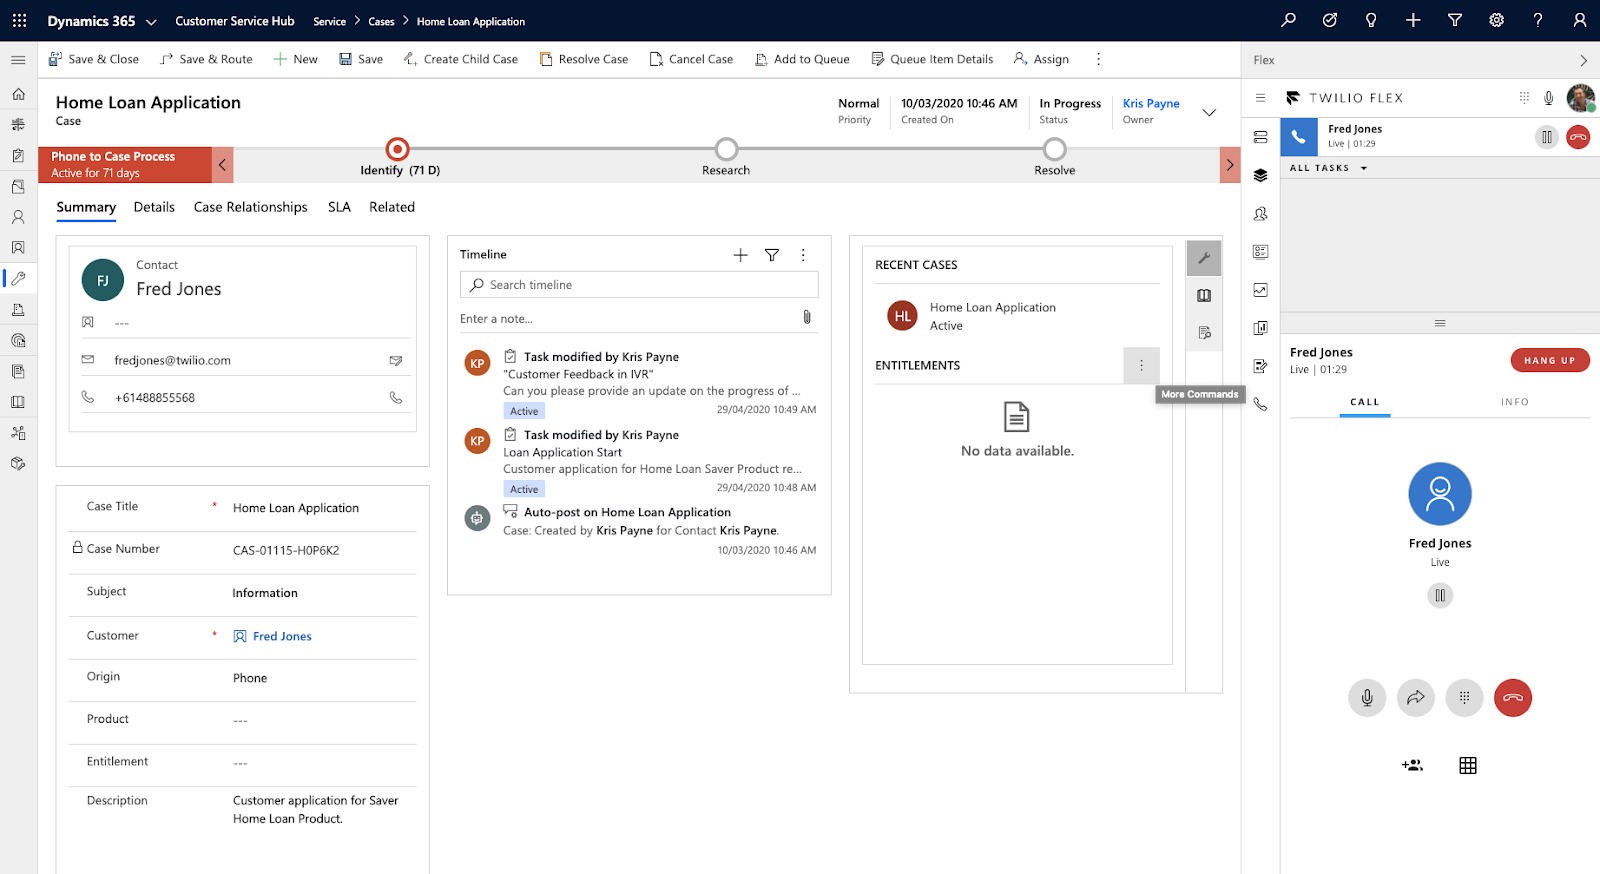 Calling into a Flex instance integrated with Dynamics 365